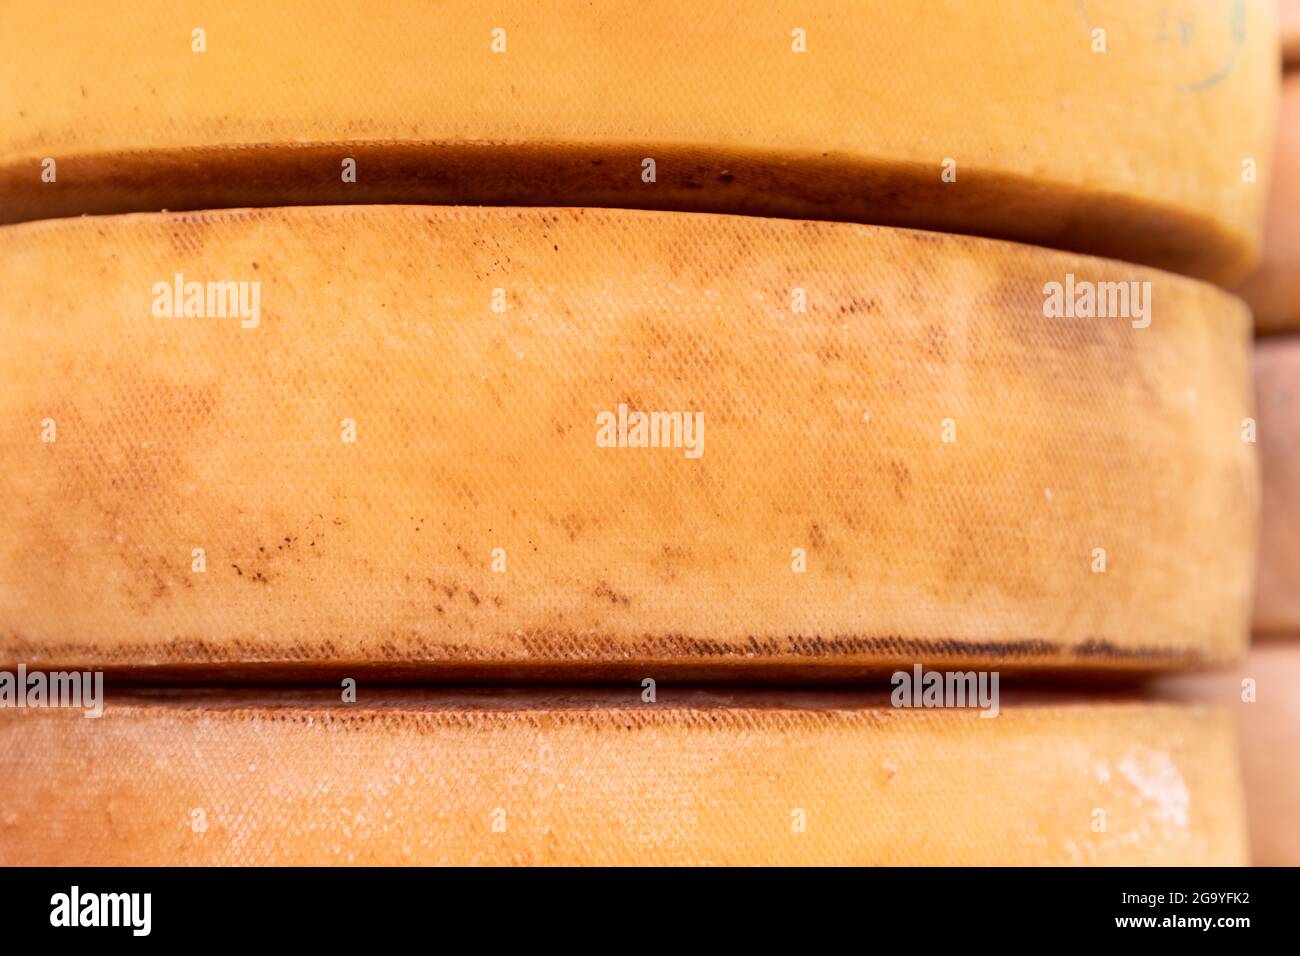 Italian cheese at the grocery market Stock Photo